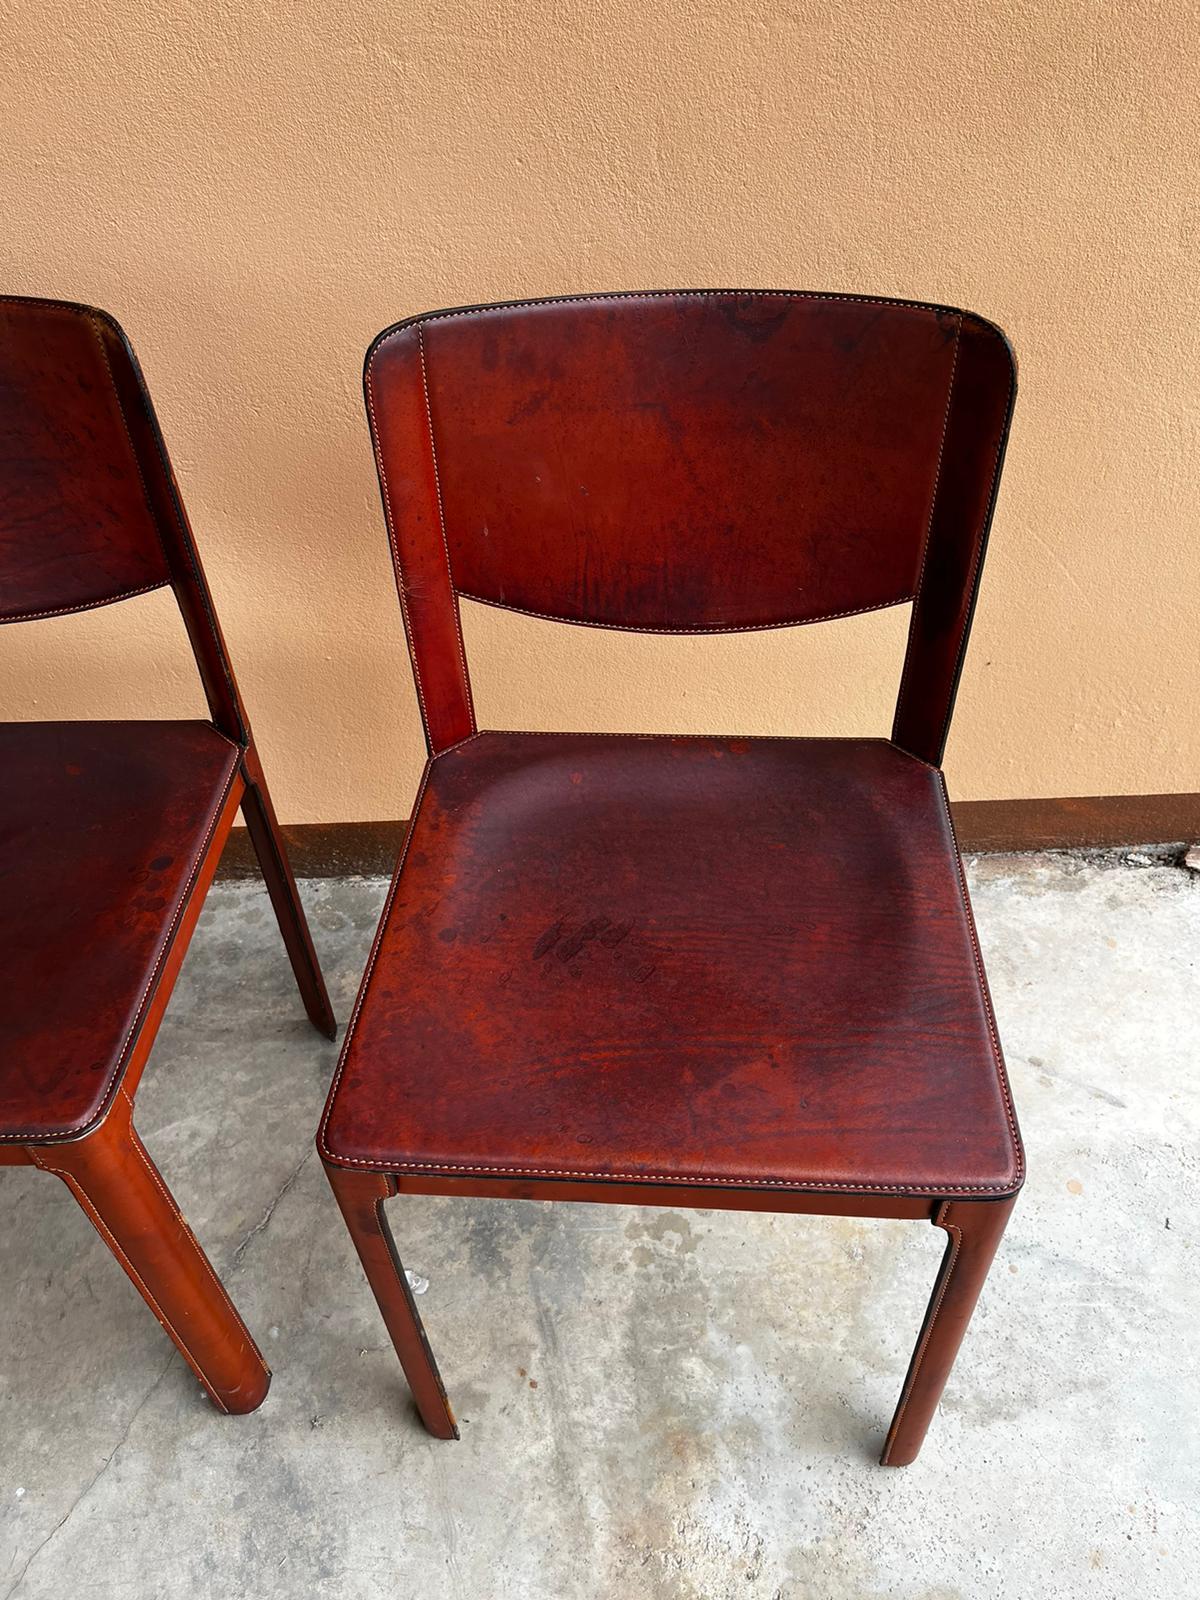 Italian 20th Century Grassi Red Leather Chairs Set of 4 For Sale